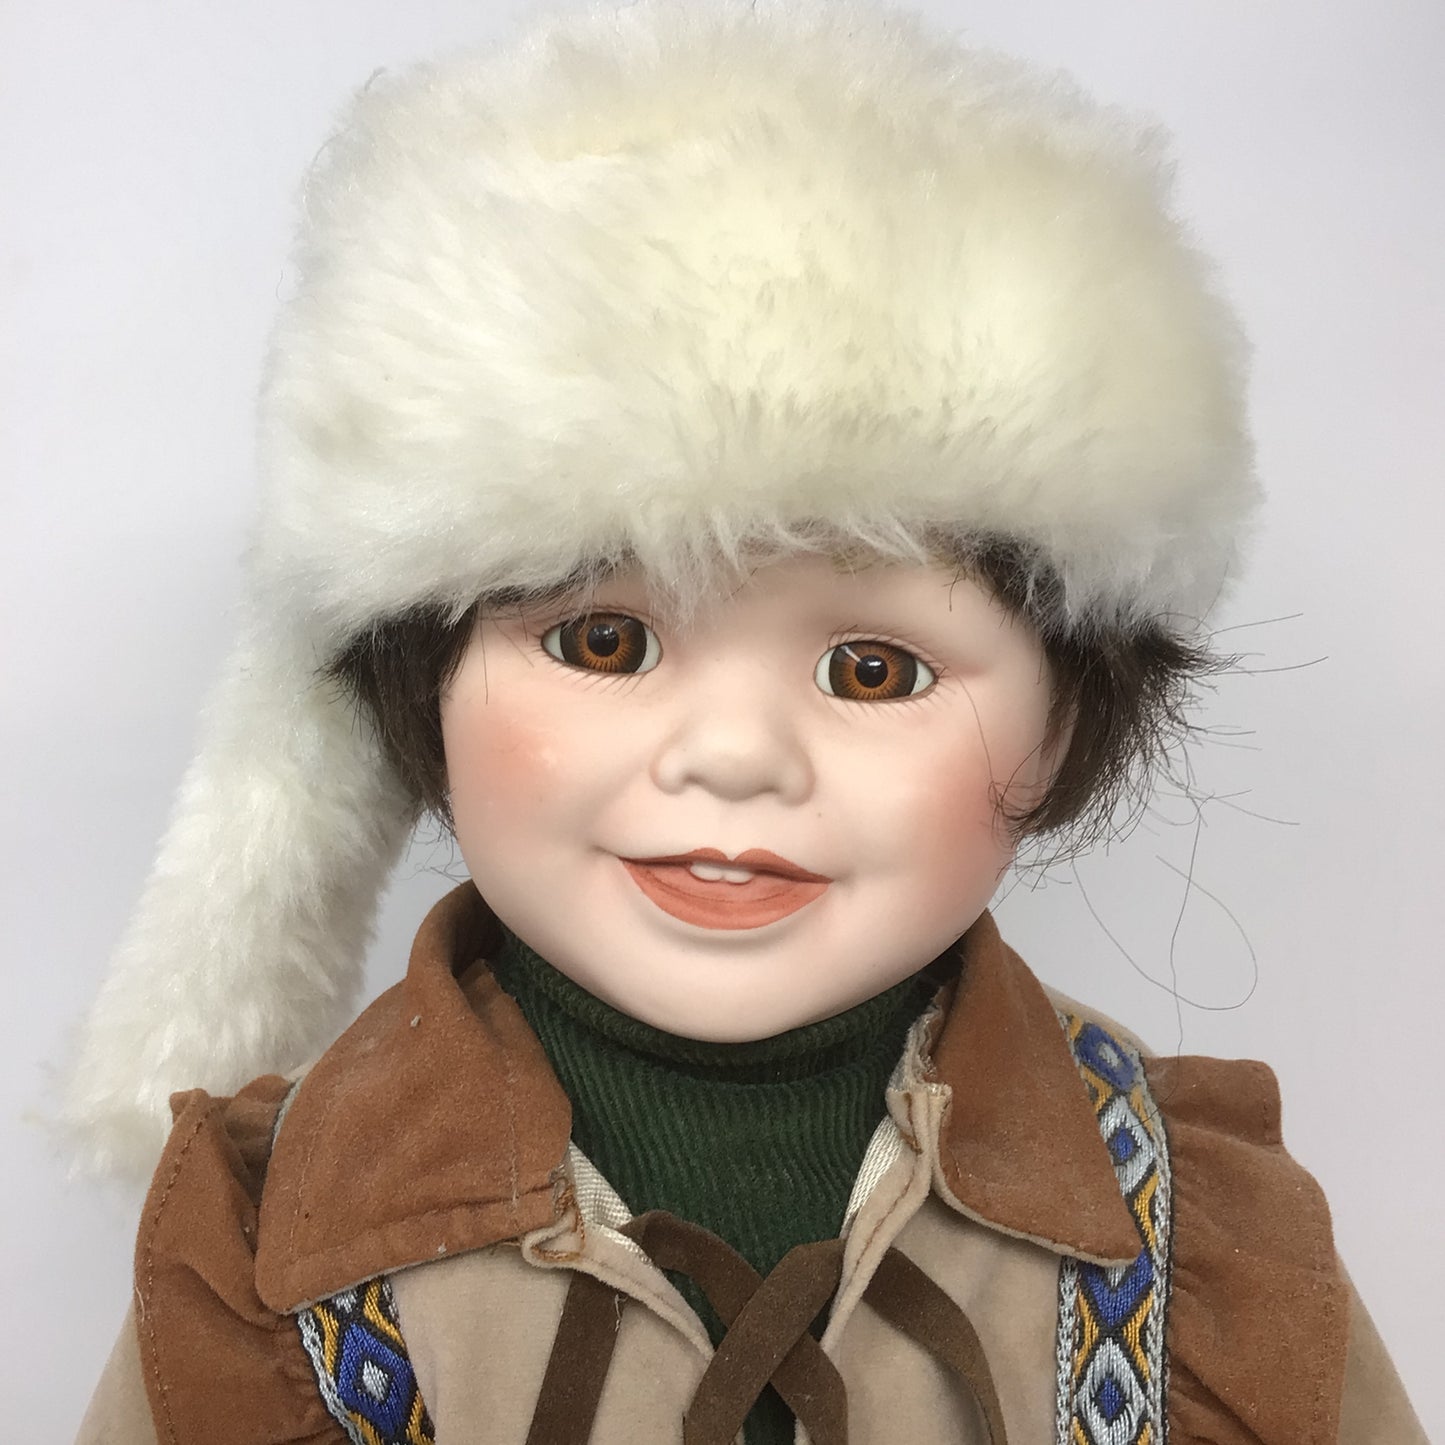 Collectable Century Collection Doll “Chimo”